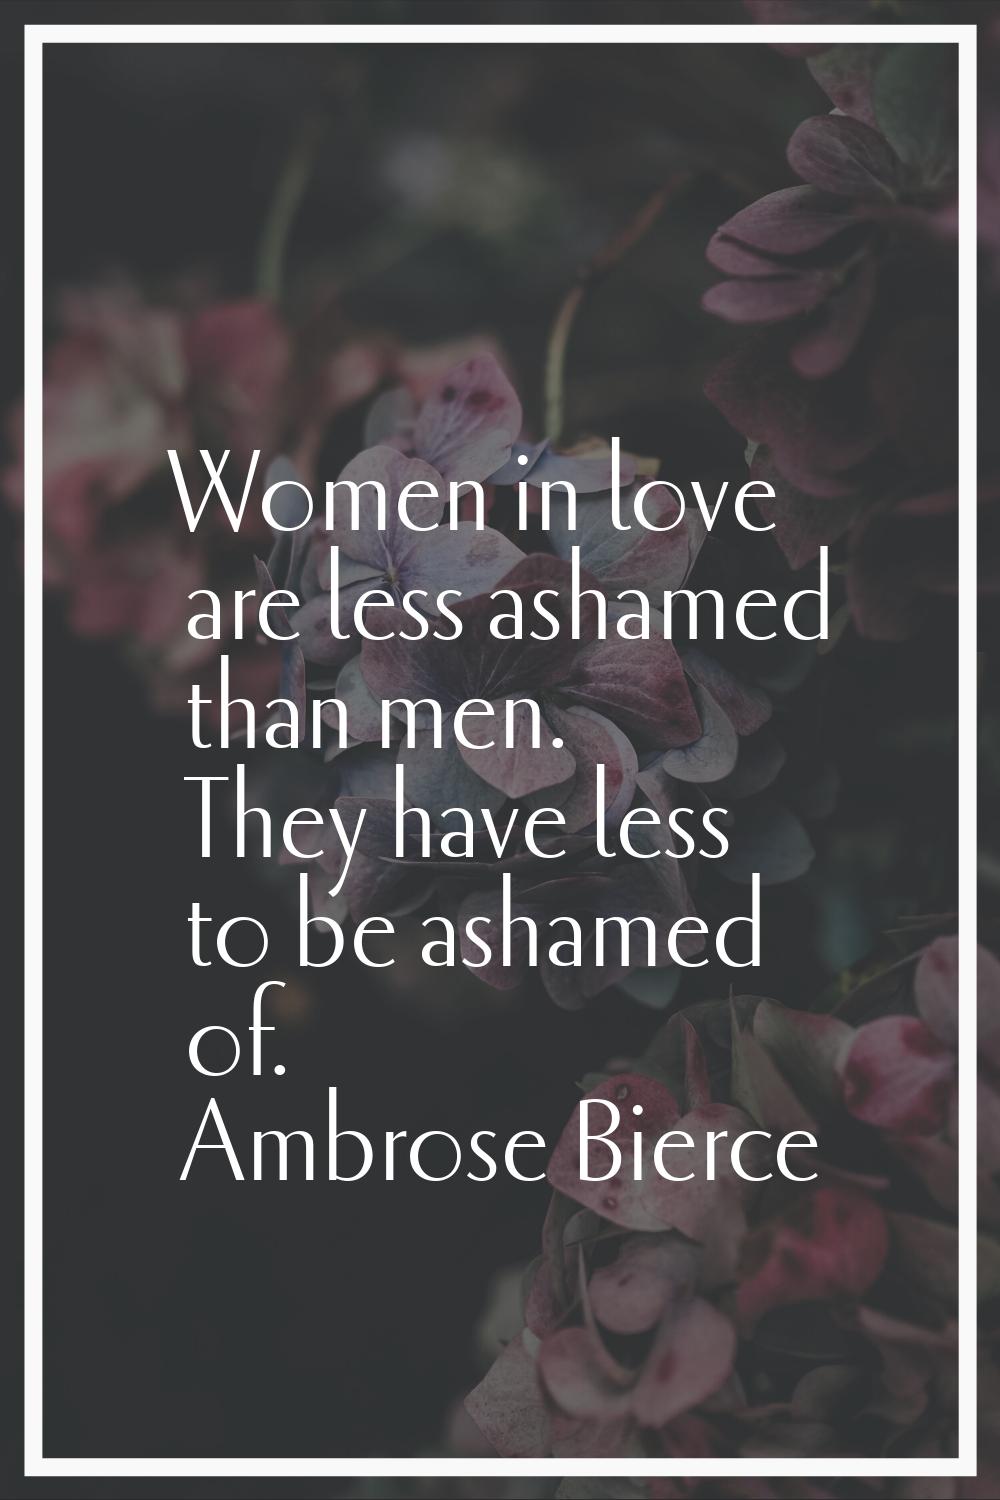 Women in love are less ashamed than men. They have less to be ashamed of.